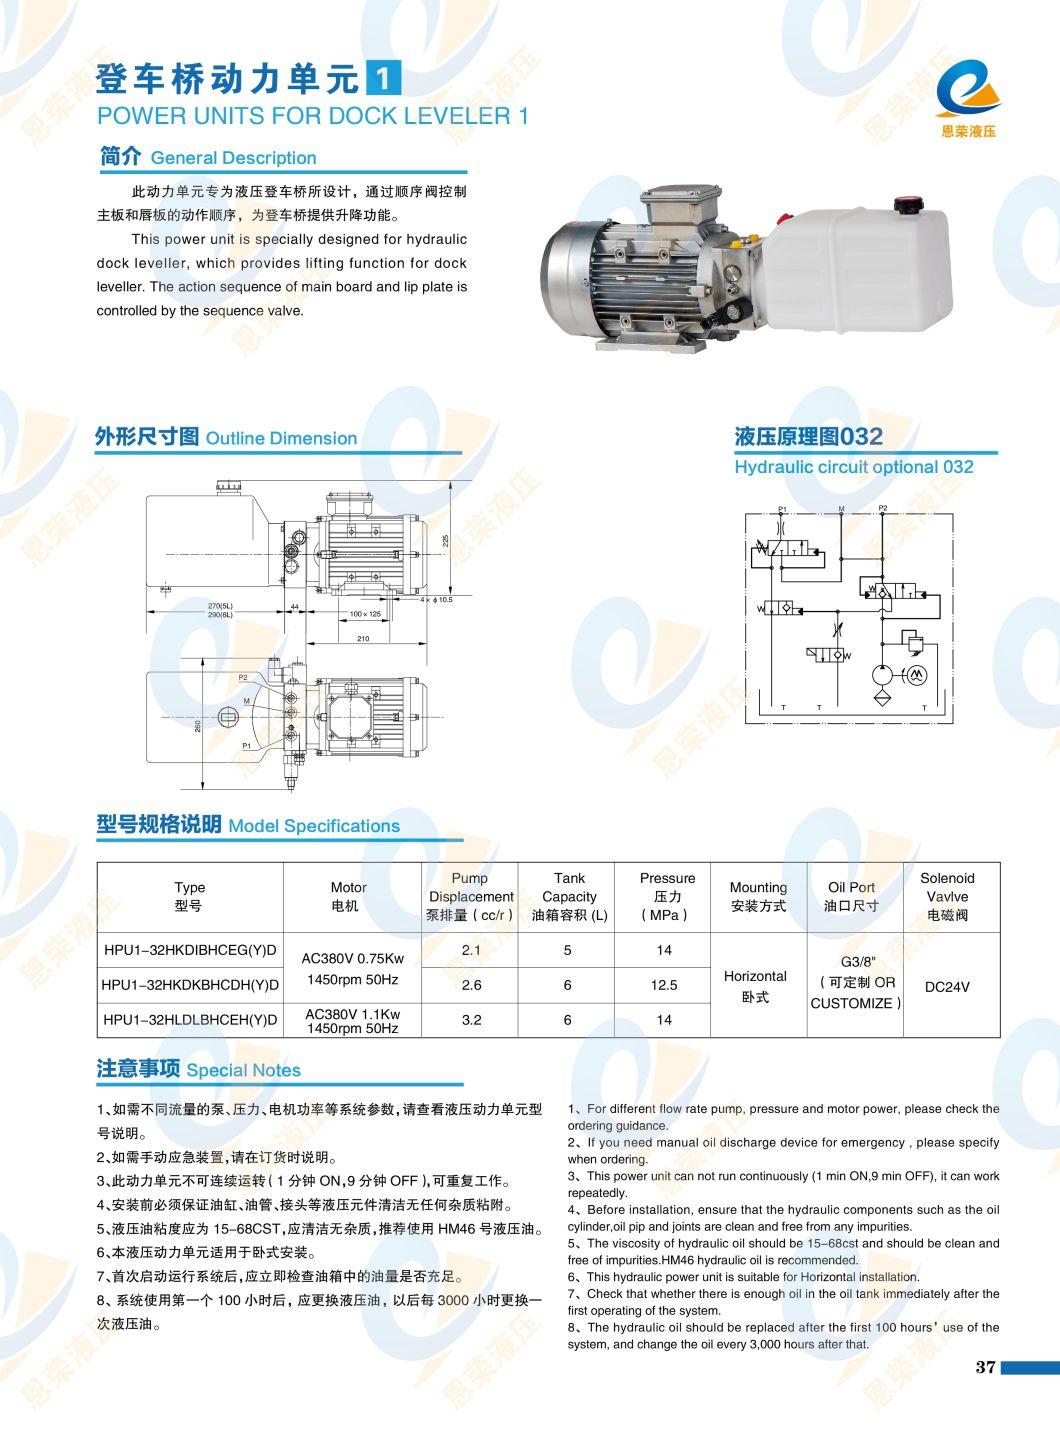 AC 380V Hydraulic Power Unit for Loading and Unloading Platform Has Good Performance and High Efficiency